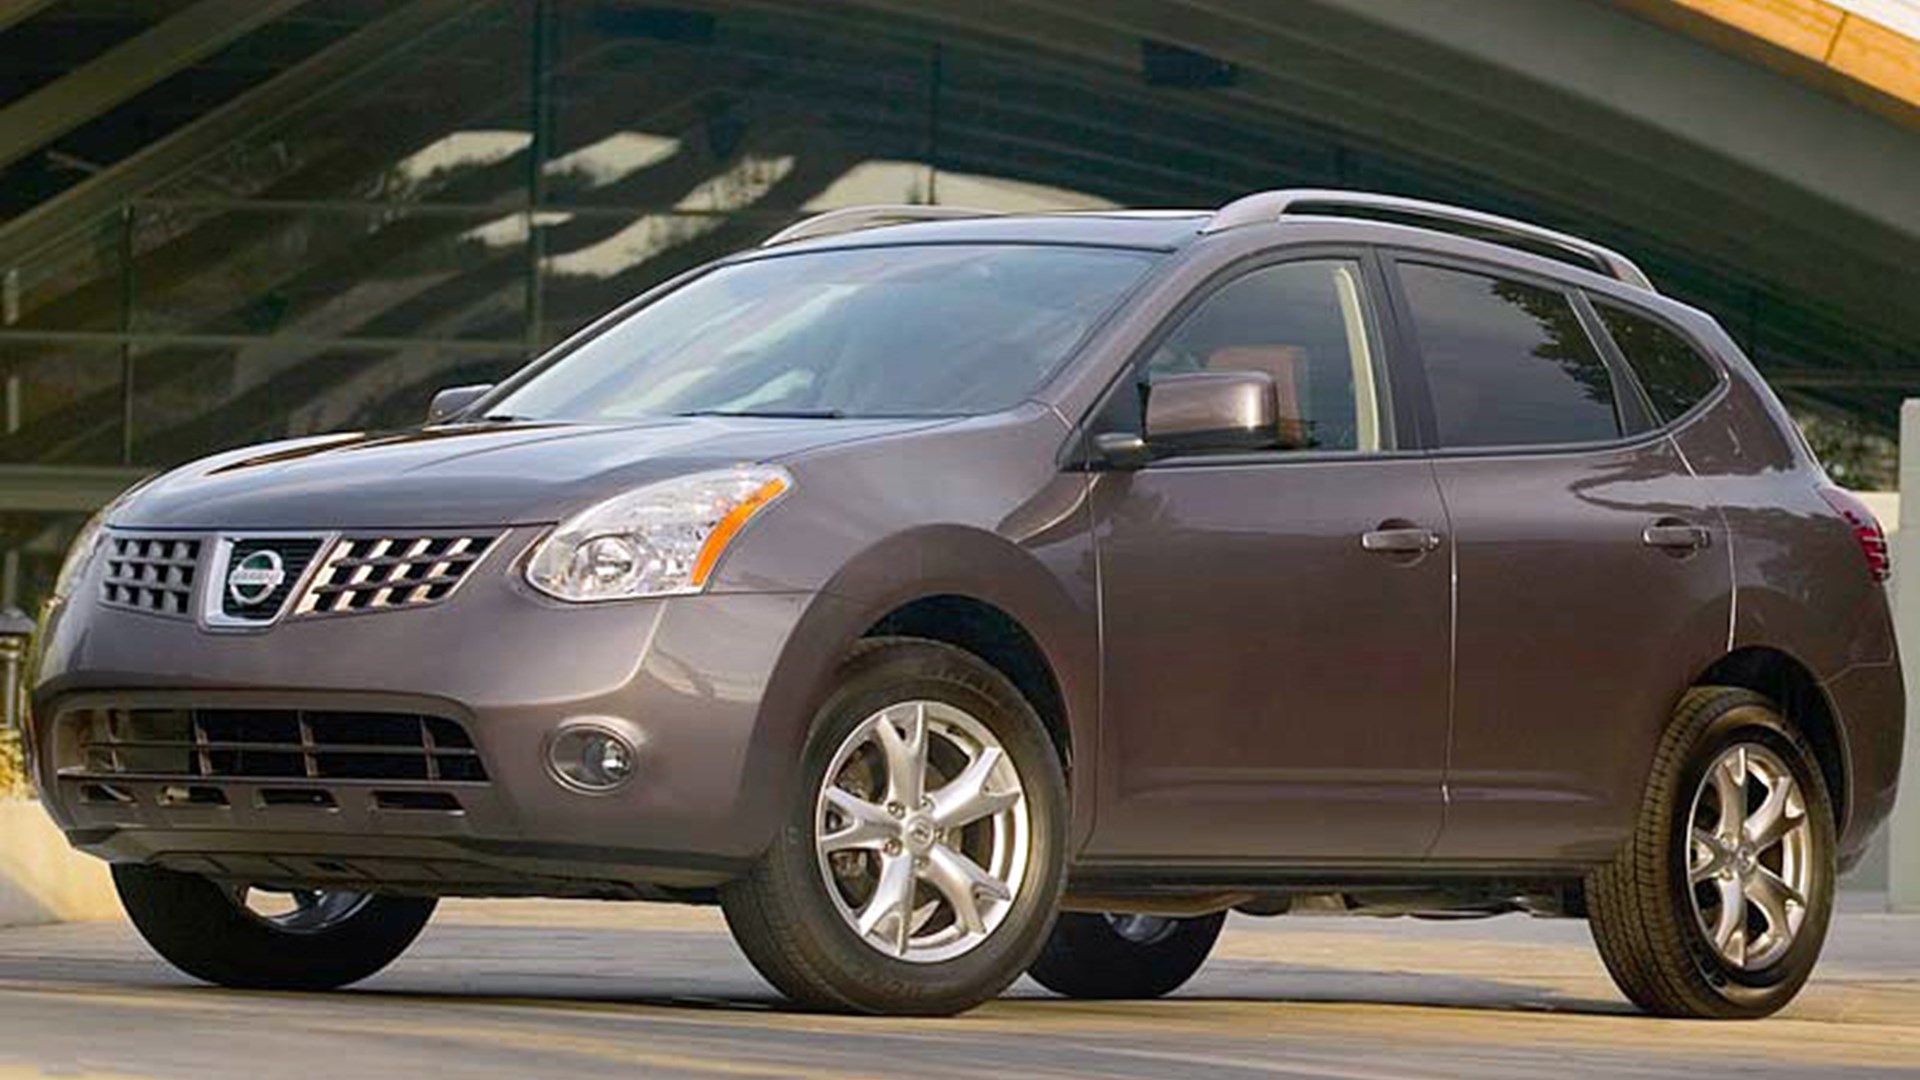 Used Vehicle Reviews: 2008 – 2010 Nissan Rogue Review | AutoTrader.ca